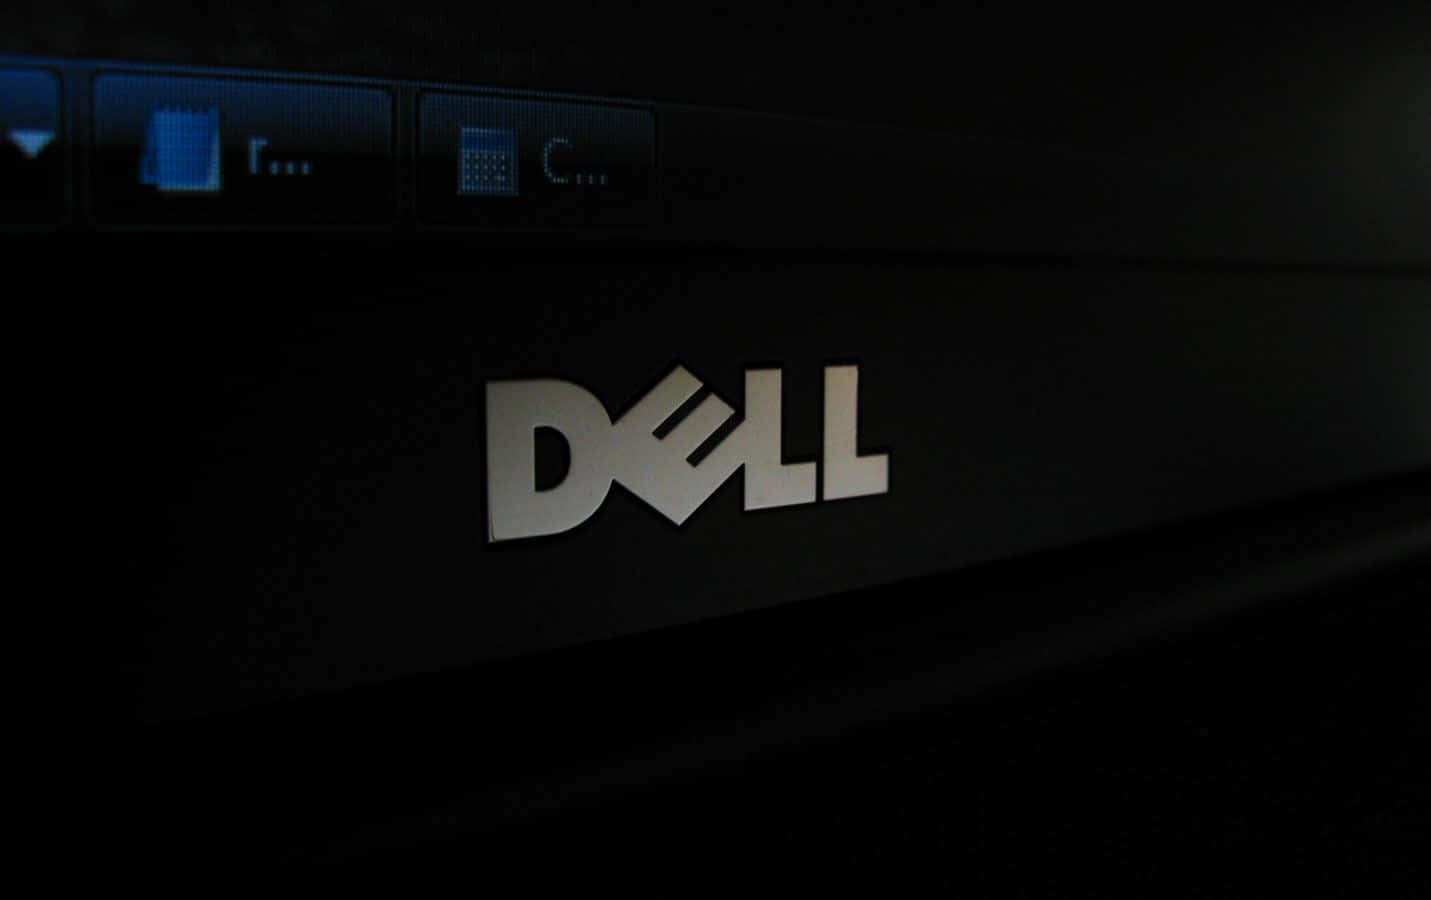 Dell - The Leaders in Technology